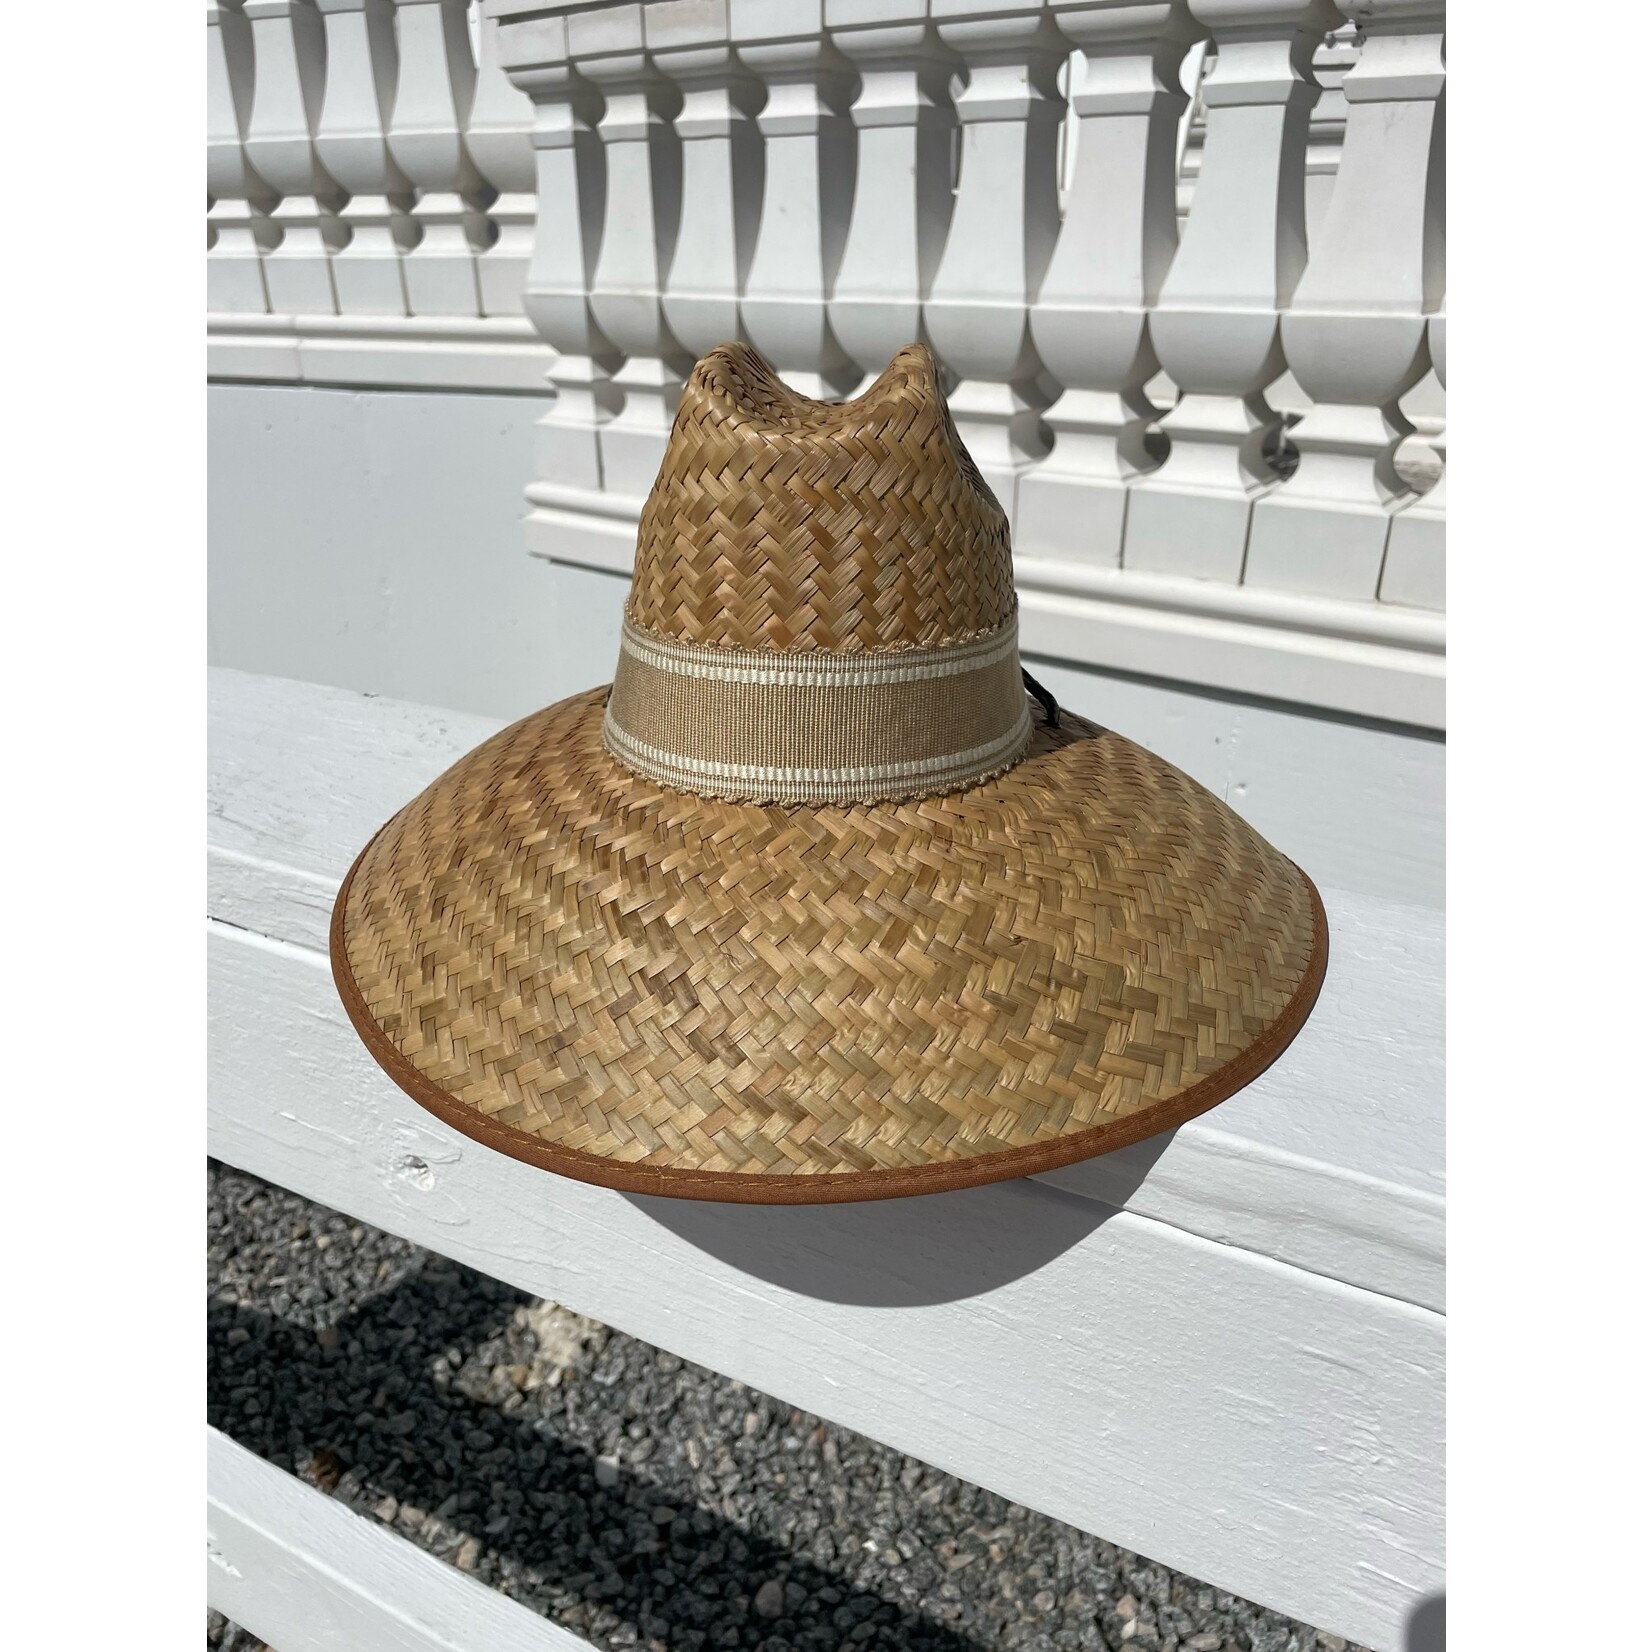 Dragonfly Designs Dragonfly Designs Sun Hat with Horse Hair hand braided adjustable slide for windy days, fits most, sizing strips available.